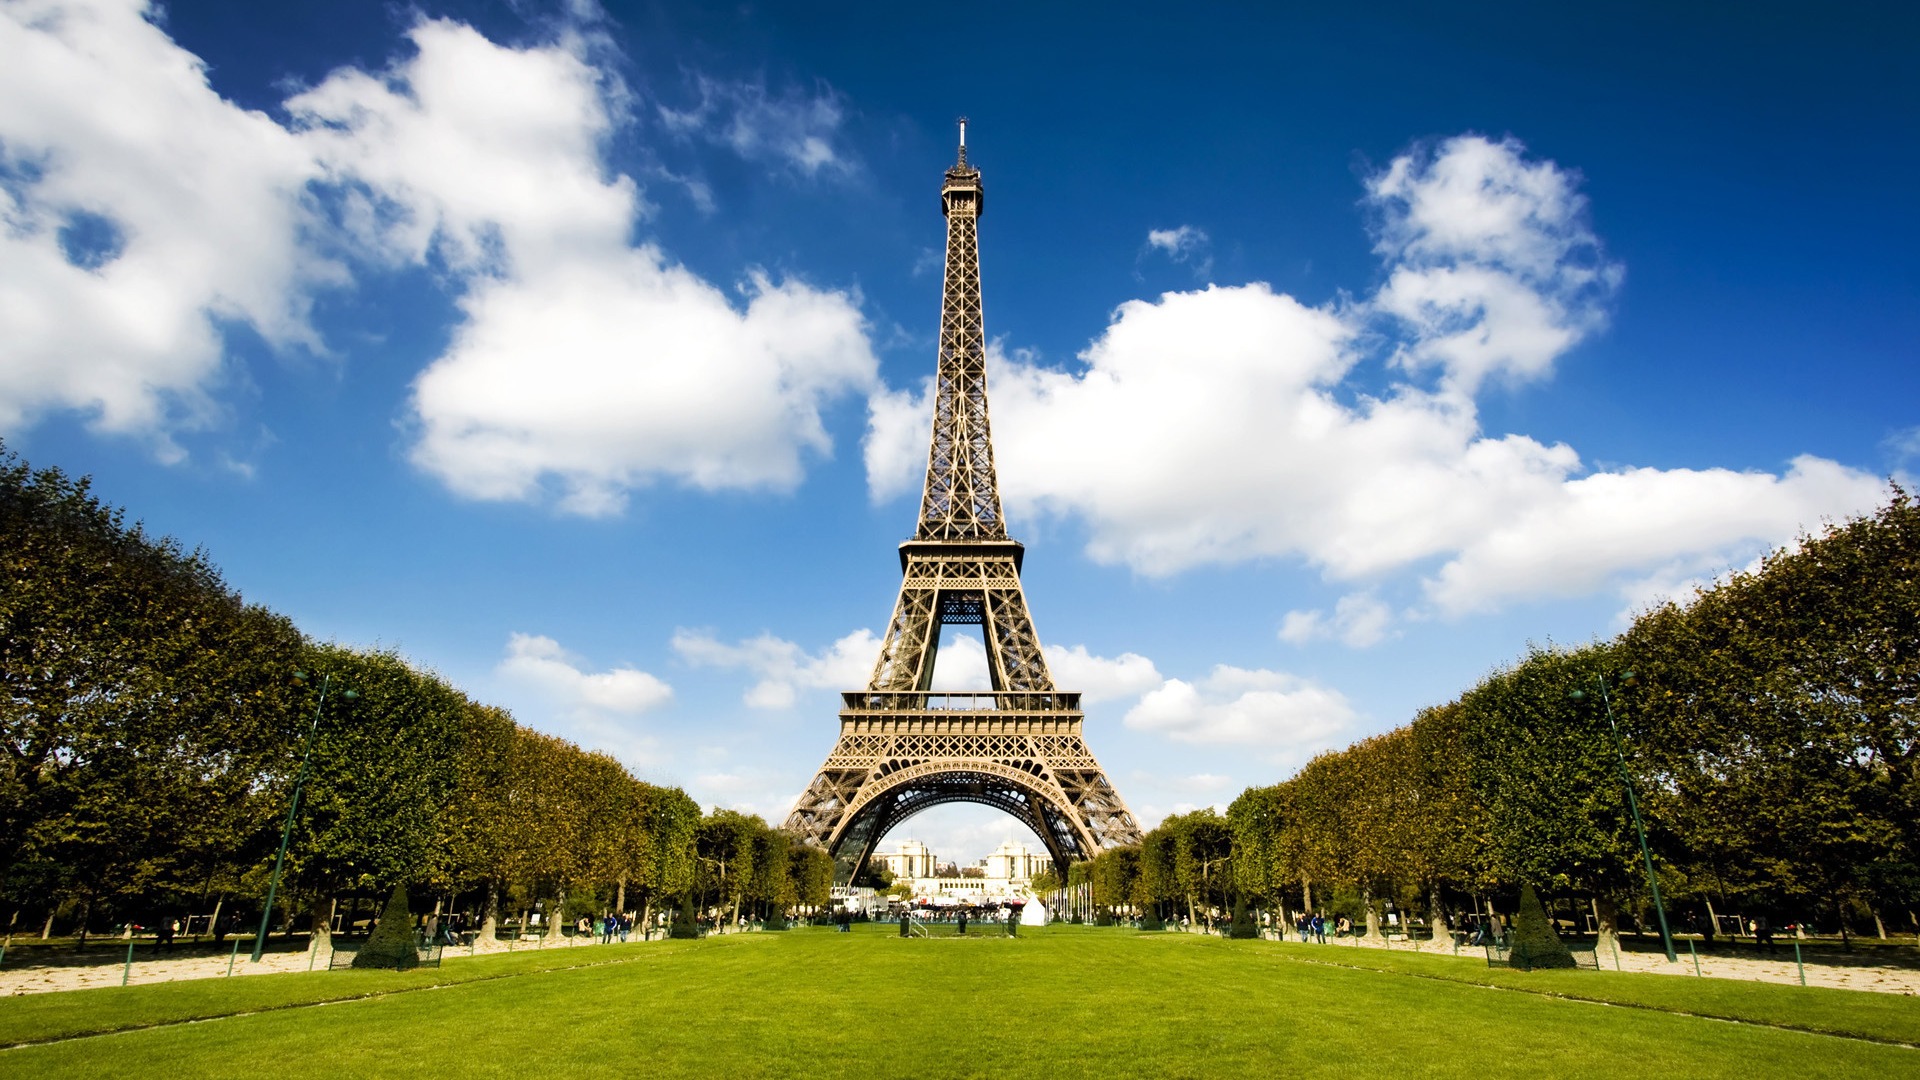 eiffel-tower-the-symbol-of-paris-hd-1080p-wallpapers-download